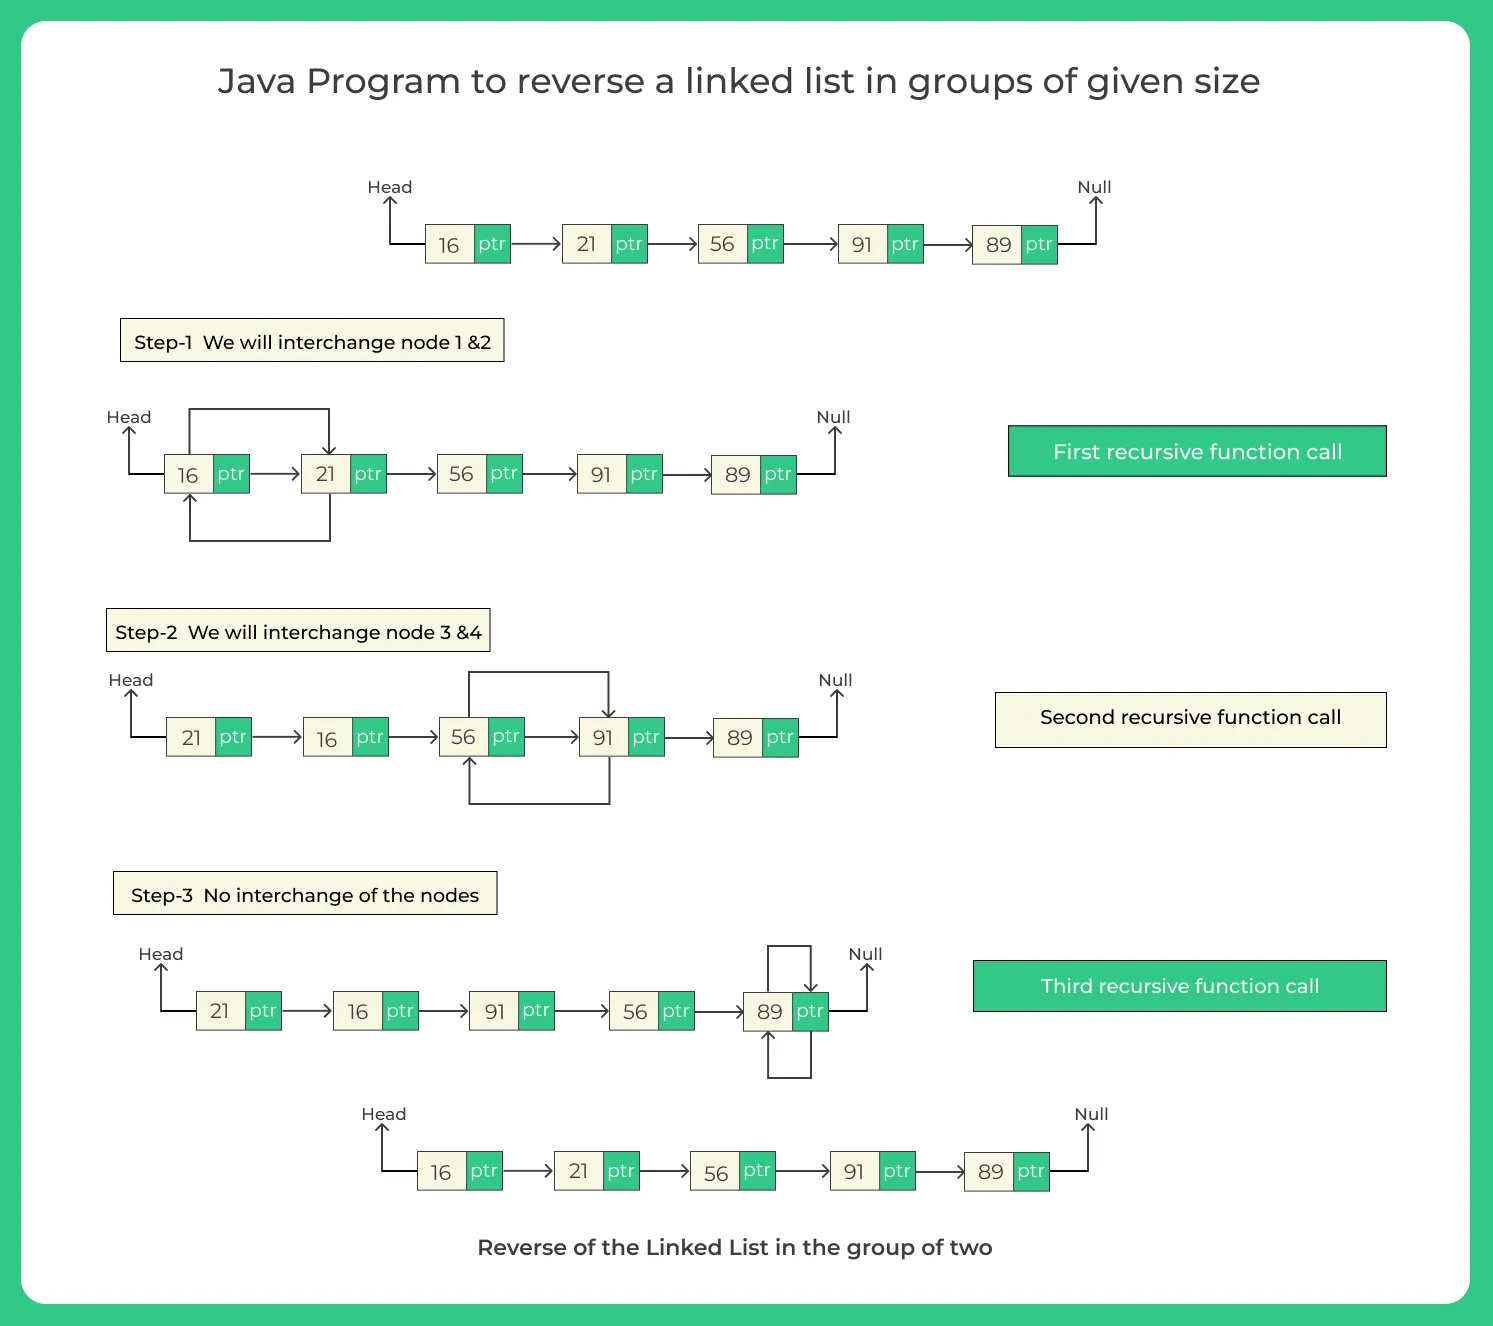 Java Program to reverse a linked list in groups of given size